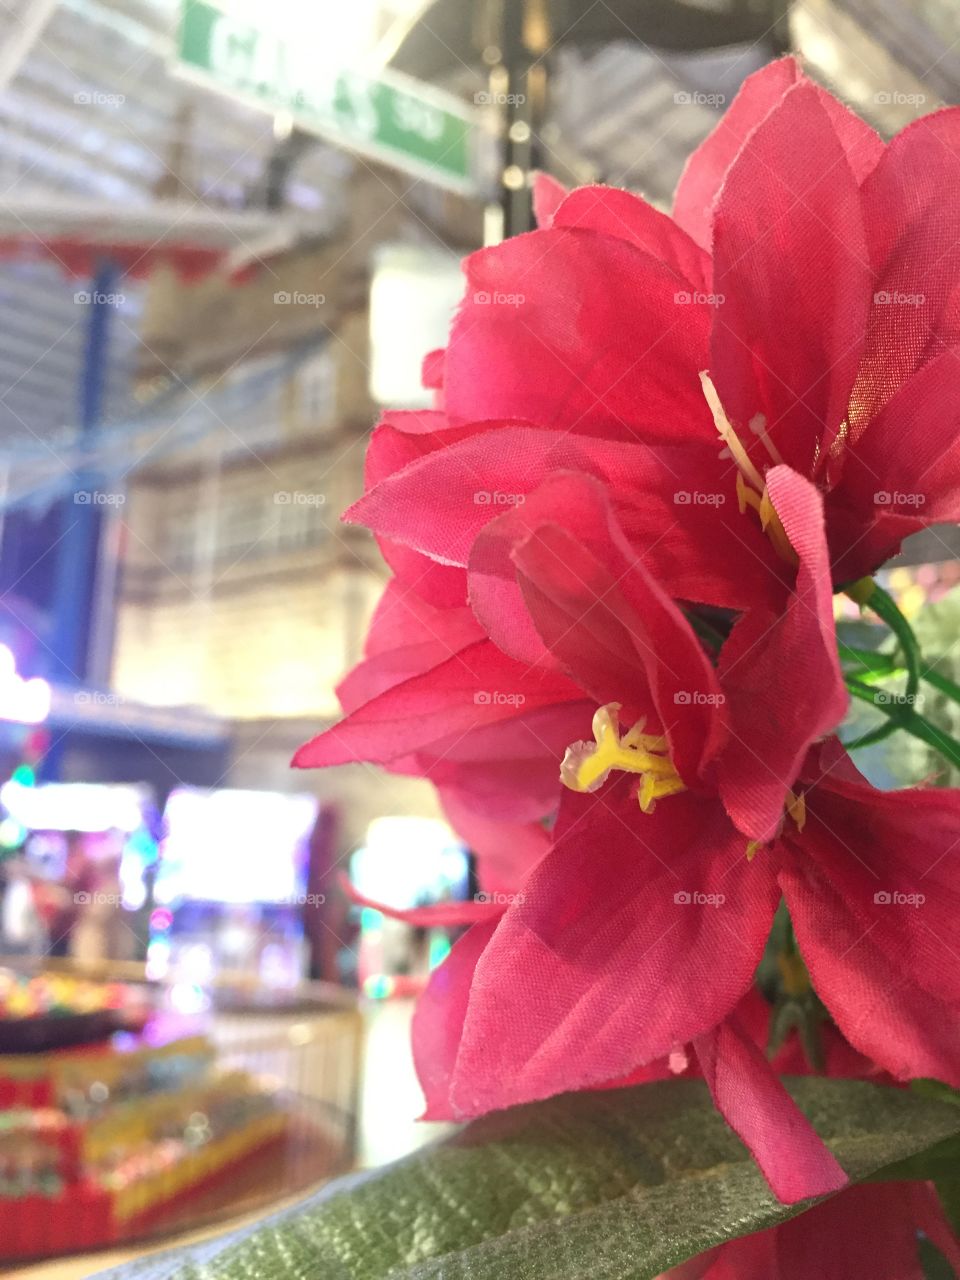 This flower but this fake flower